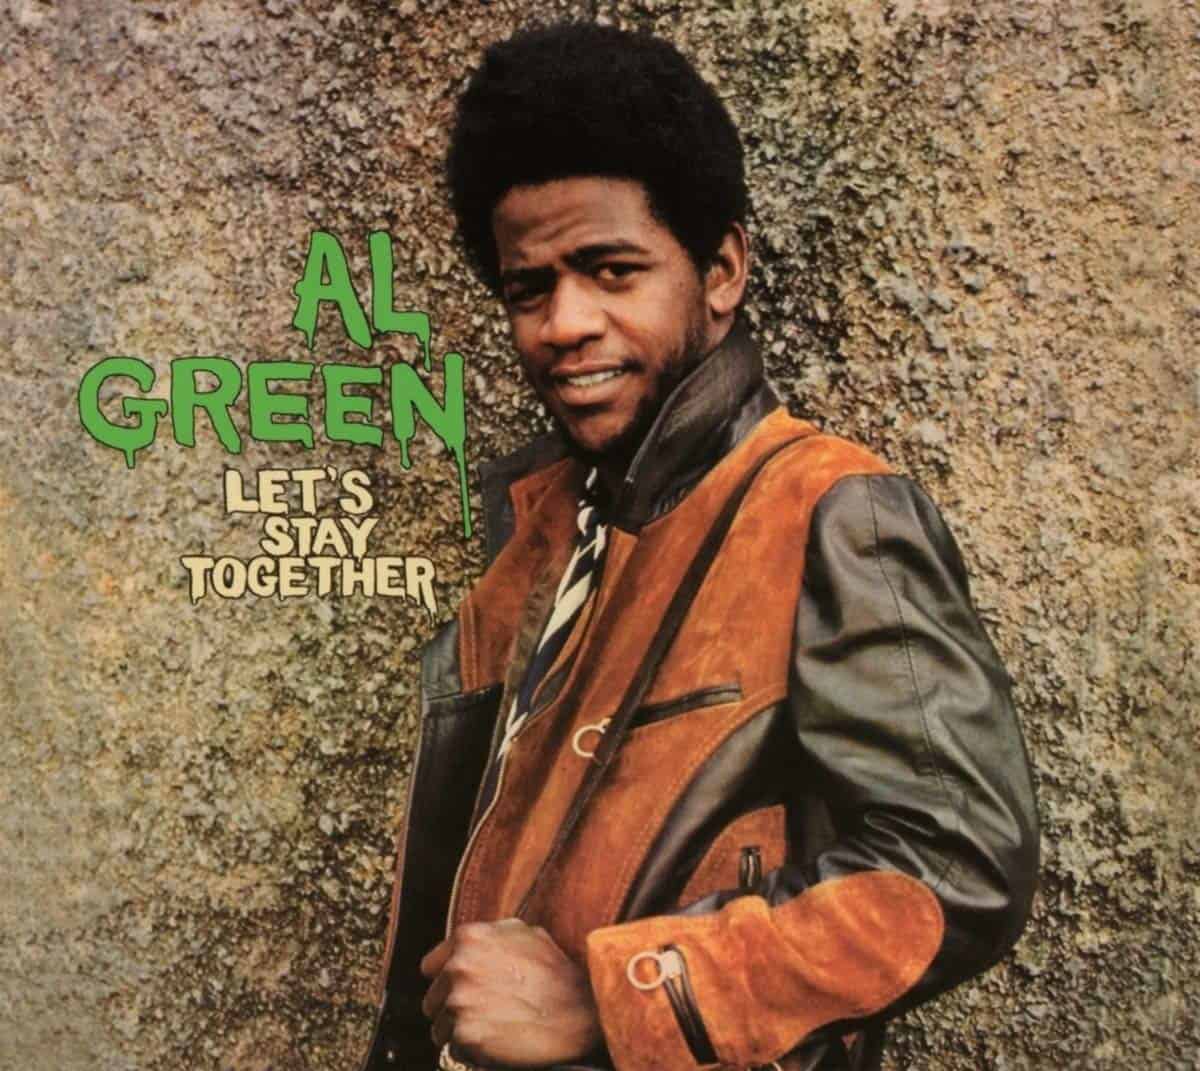 Al-Green-Lets-Stay-Together-vinyl-record-album-front